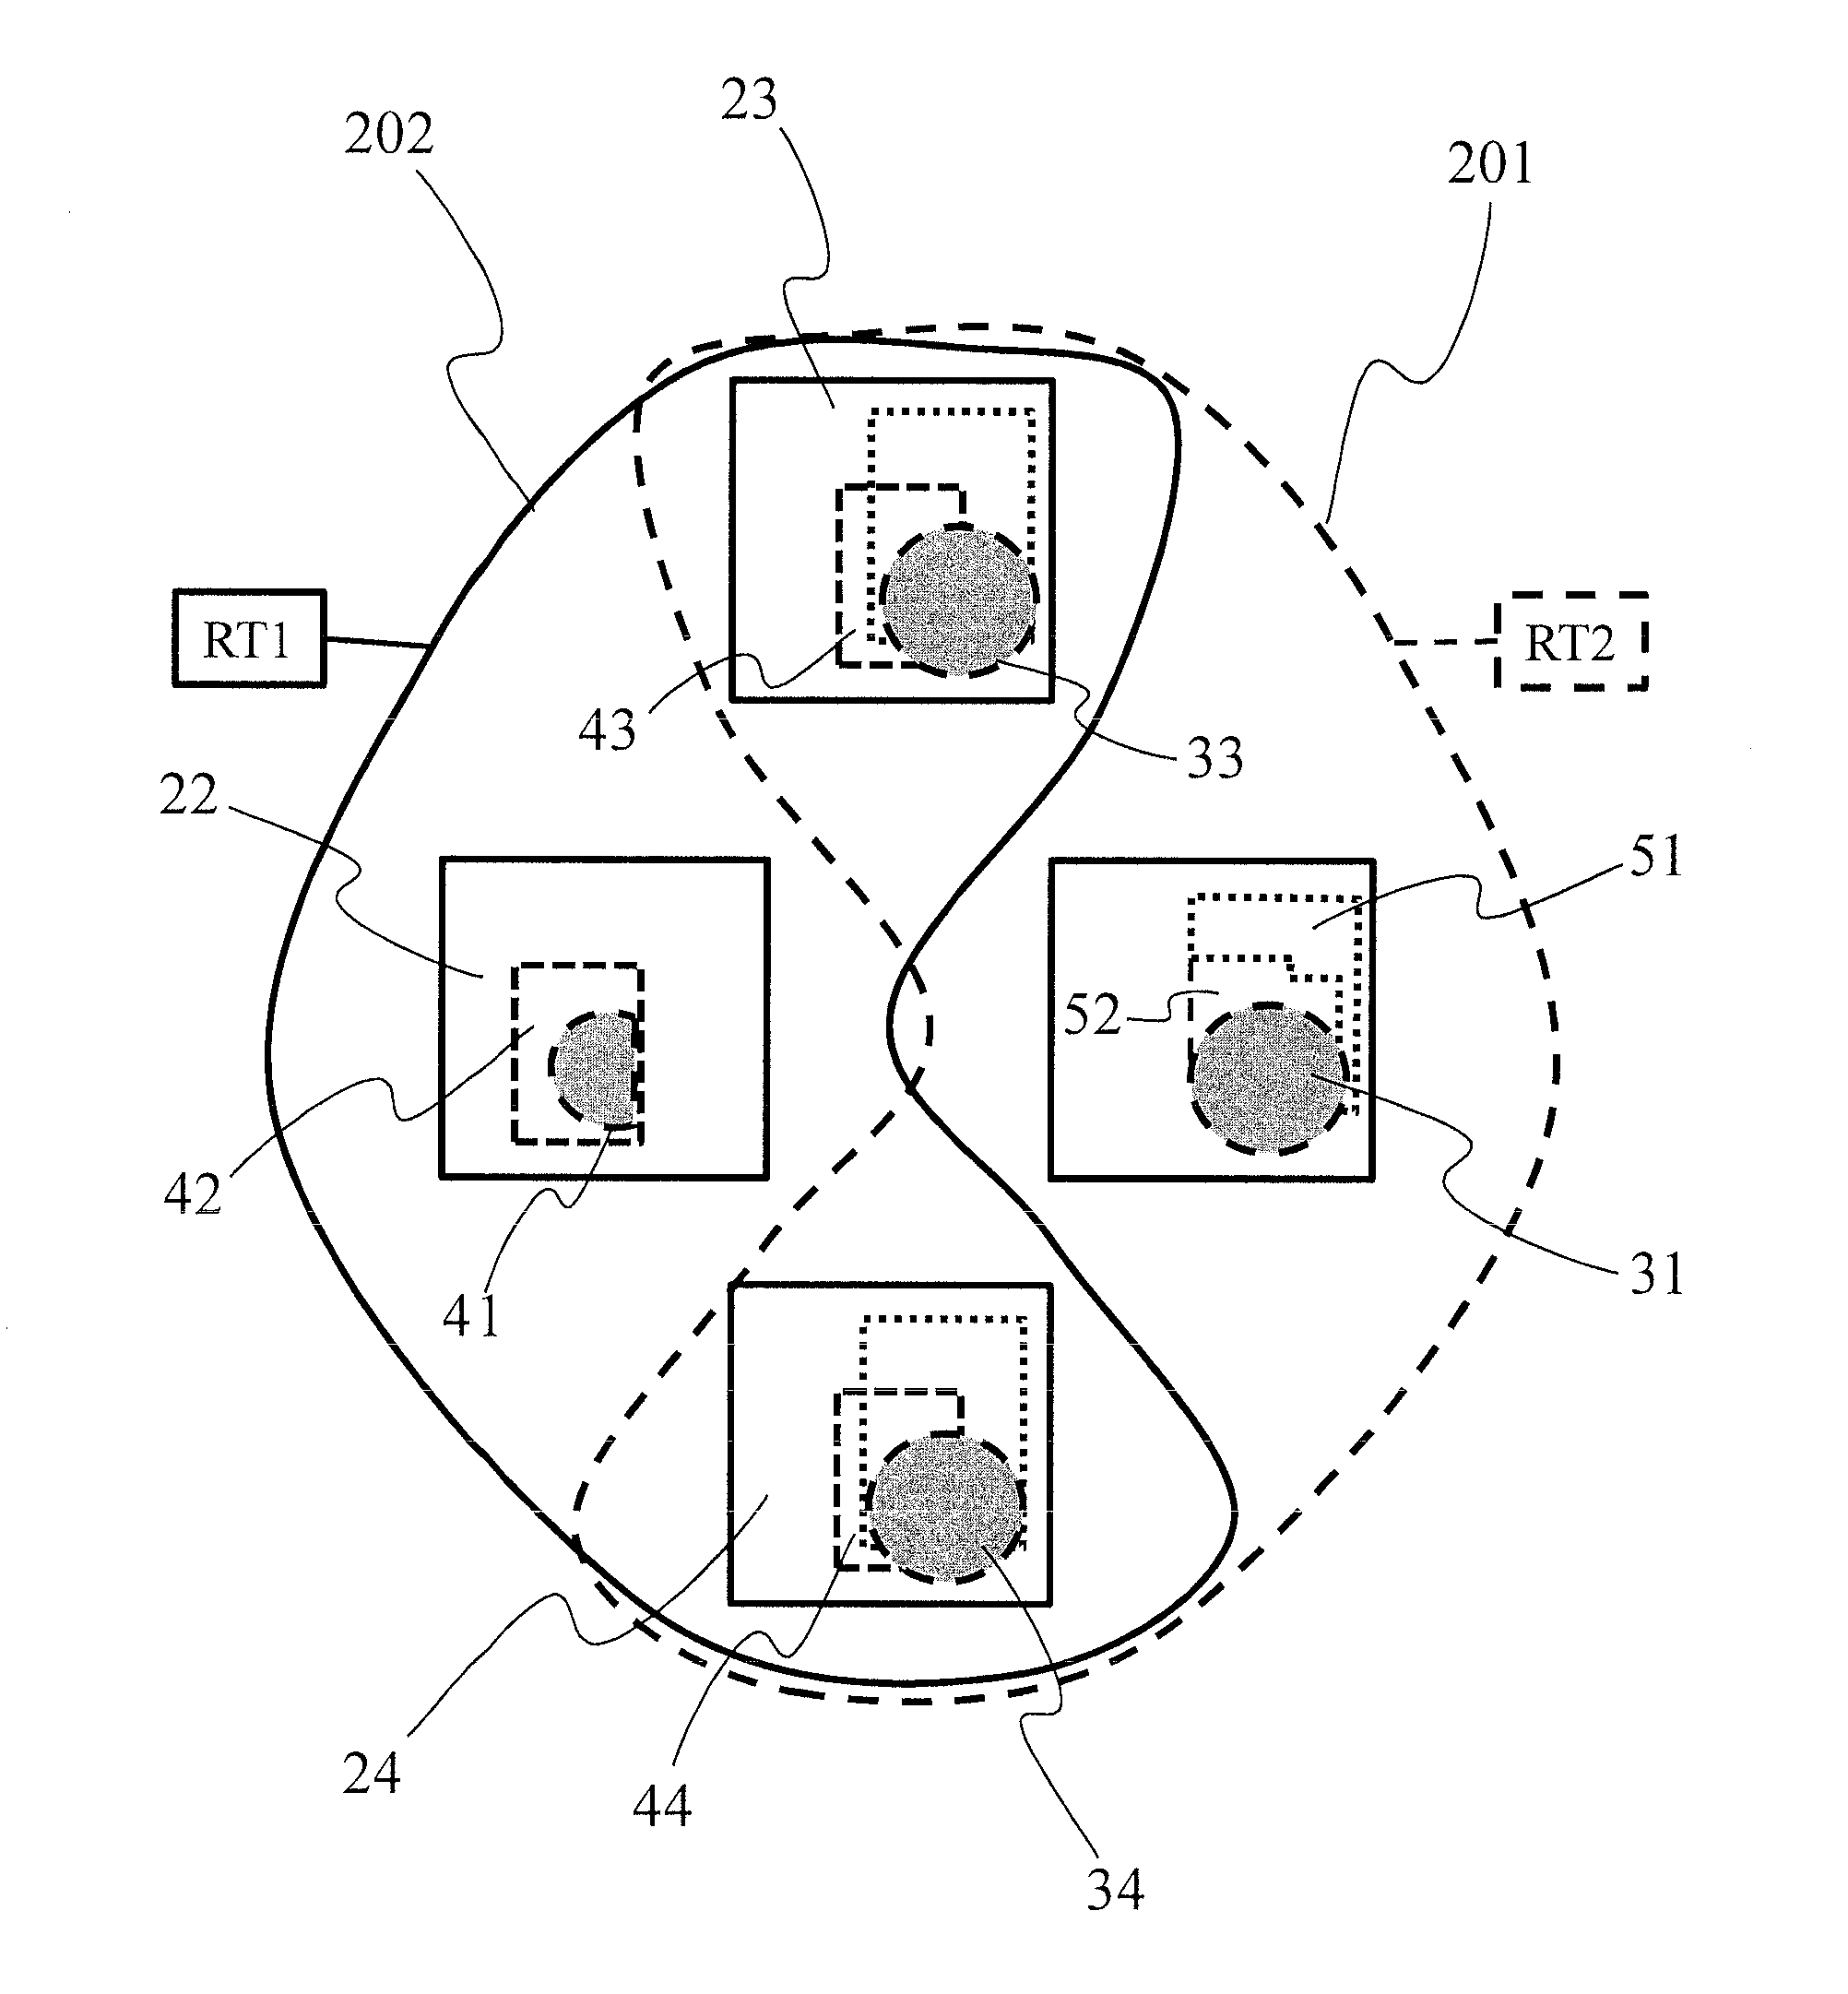 Method for estimation of occlusion in a virtual environment